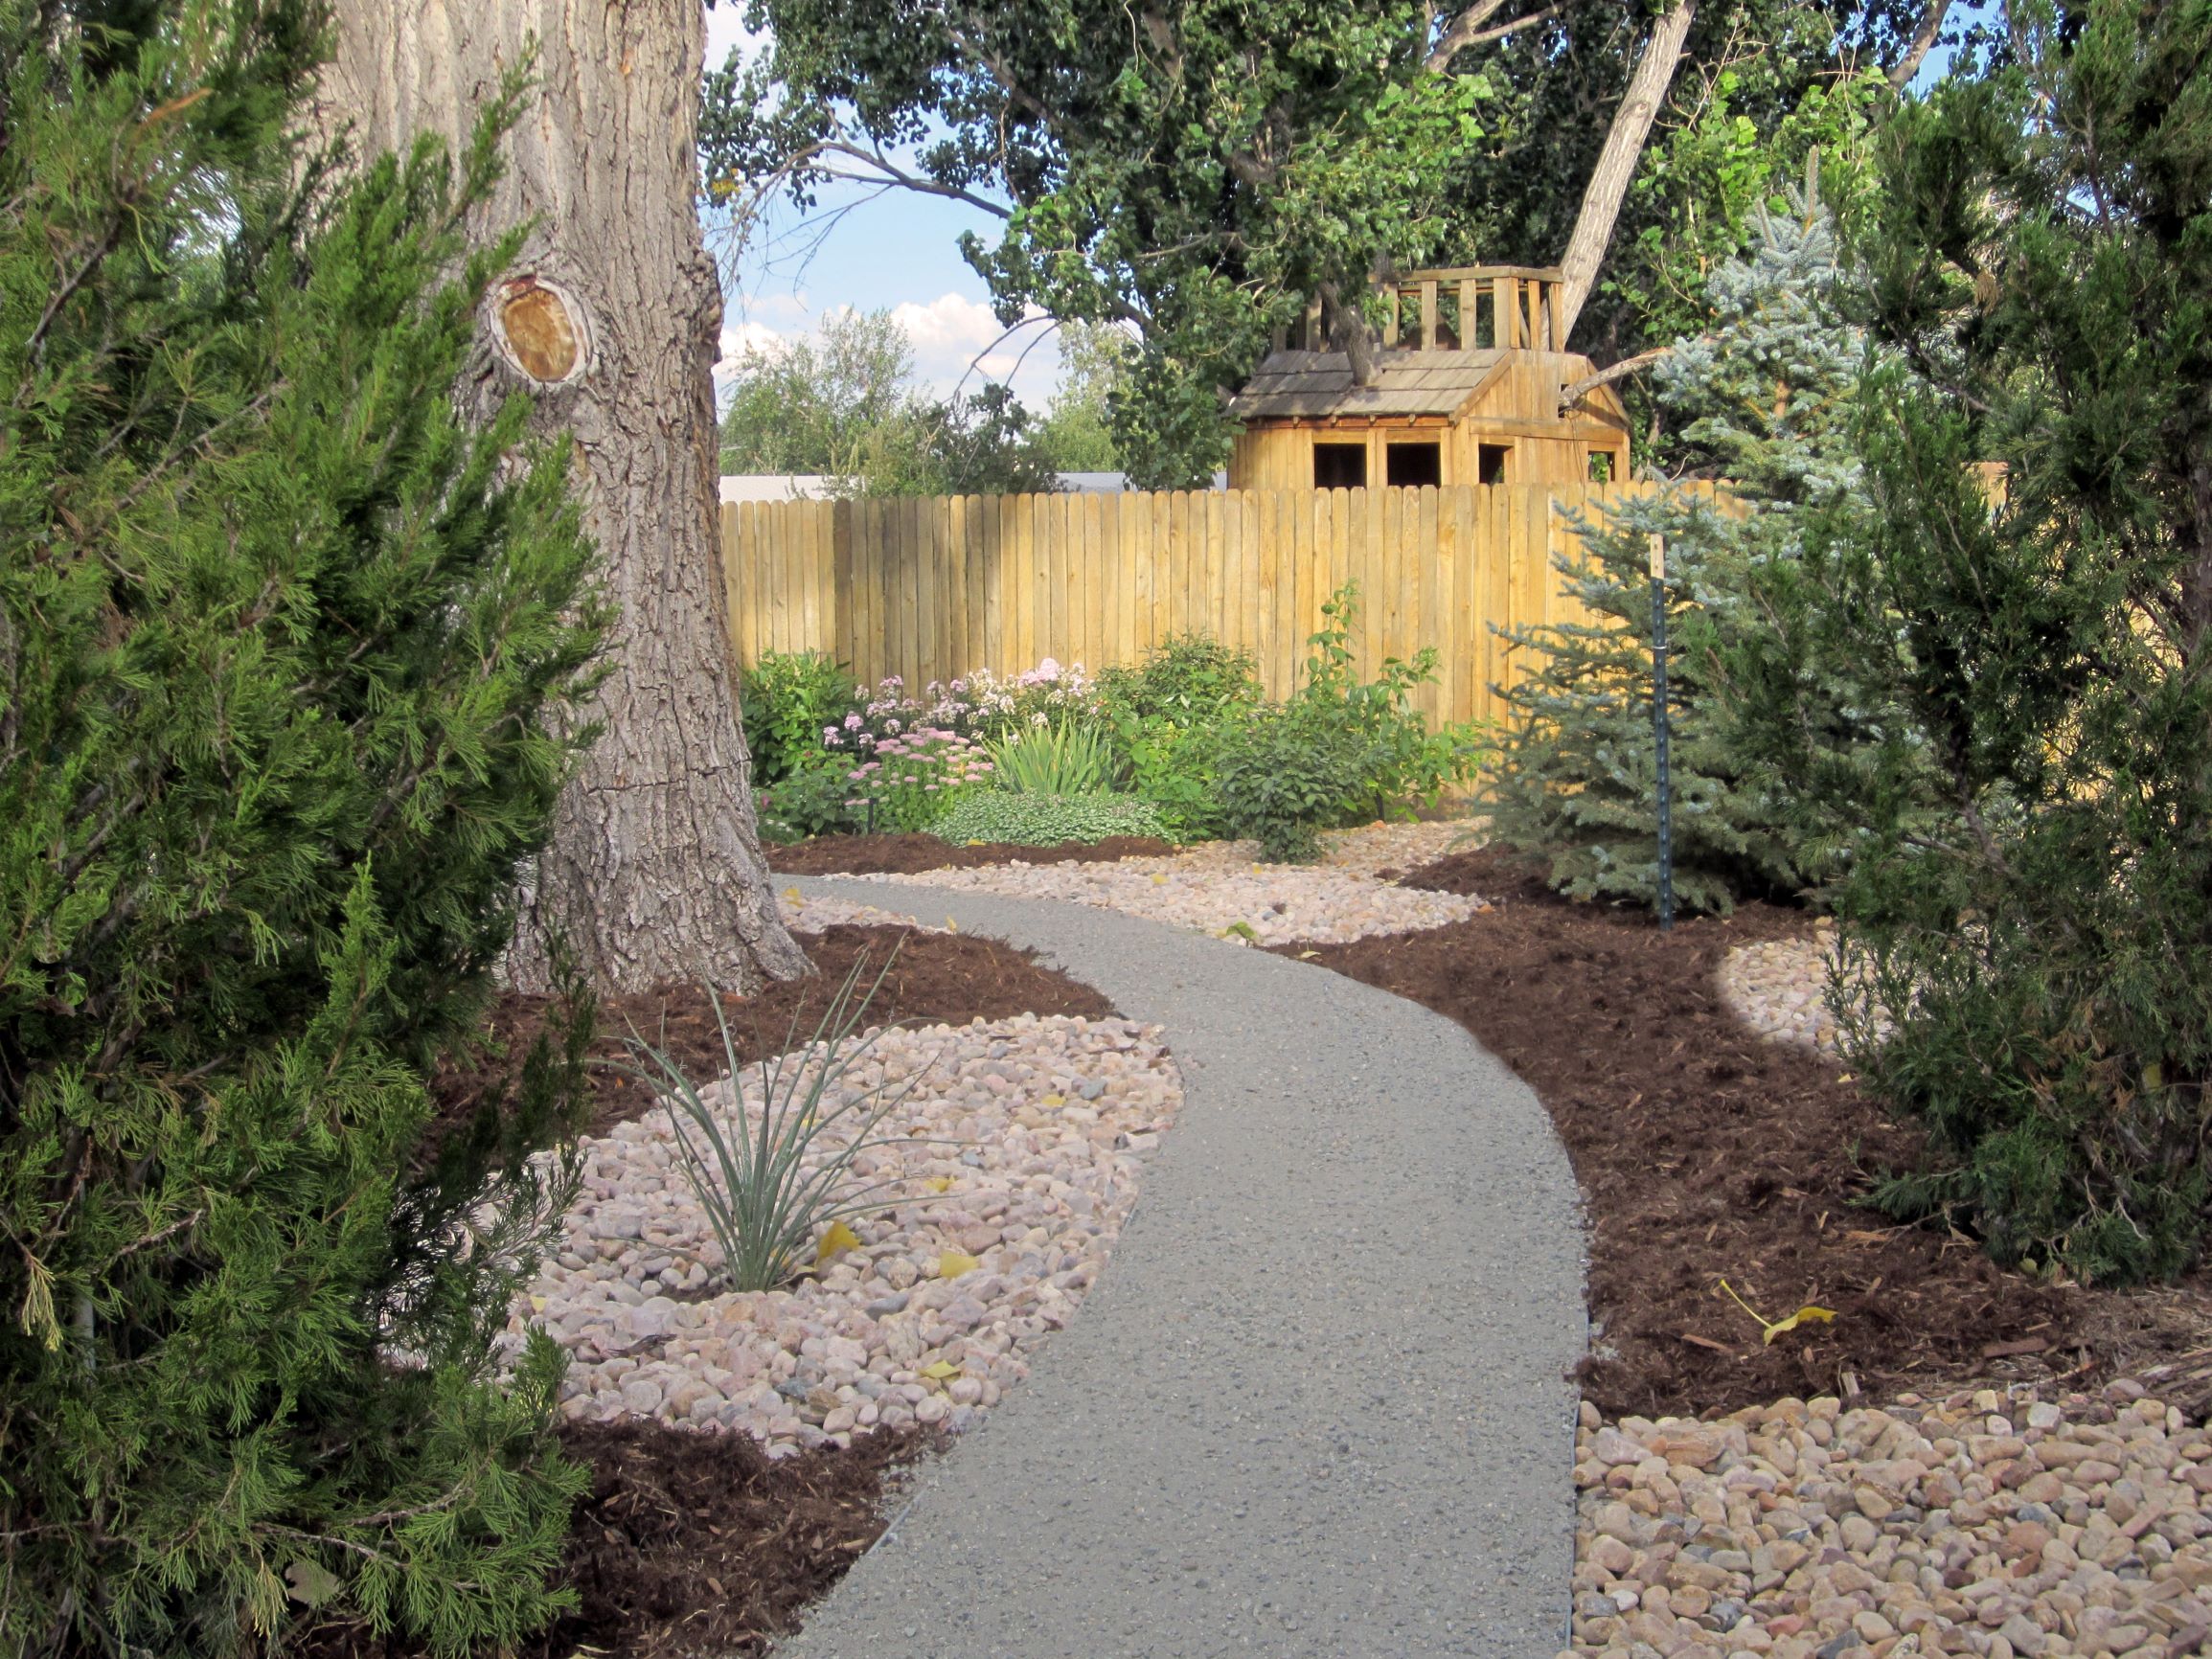 Gravel path through a back yard surrounded by rock and mulch as well as trees, plants, and bushes.